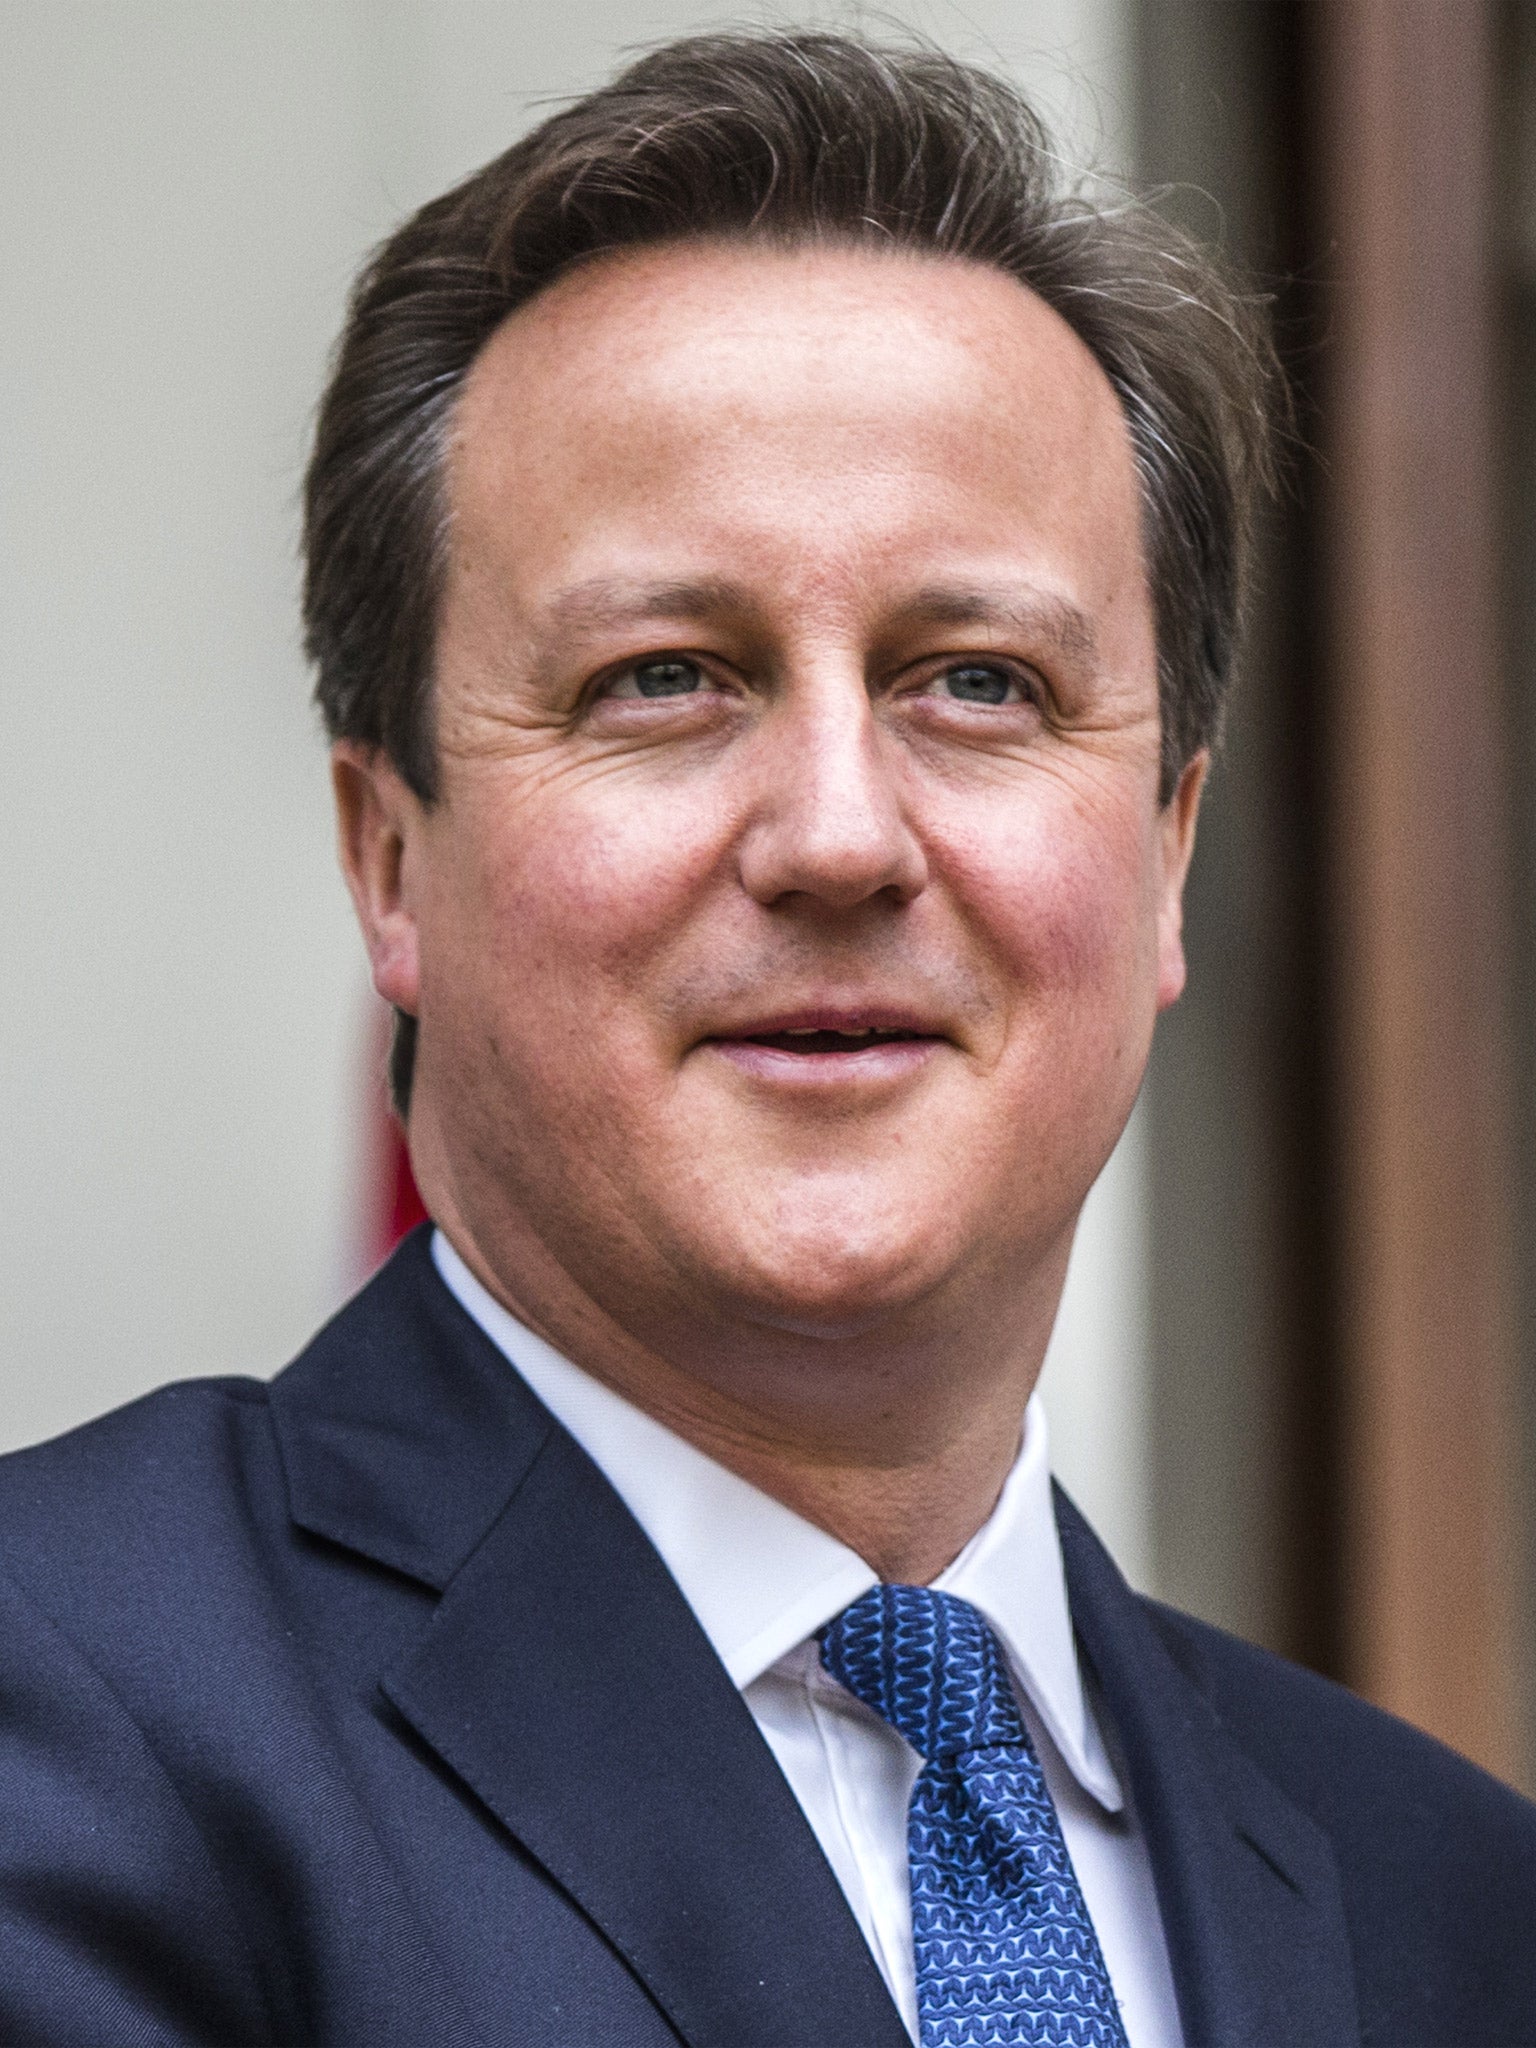 David Cameron said he would be 'disappointed' if Nick Clegg voted in favour of a 'mansion tax'